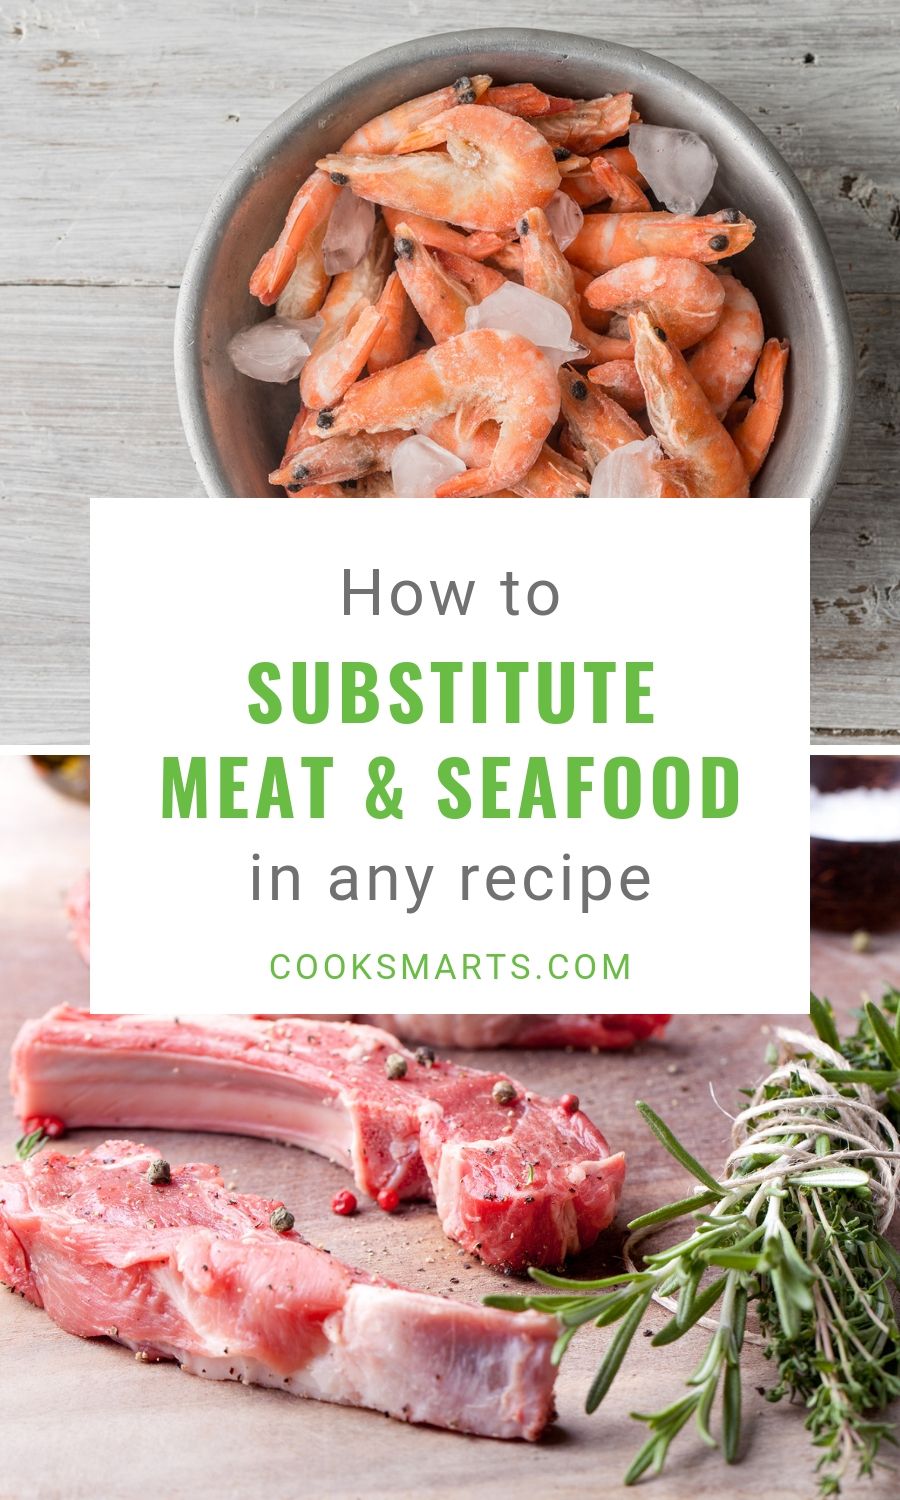 Cooking Substitutions: How to Swap Meat, Poultry, & Seafood | Cook Smarts